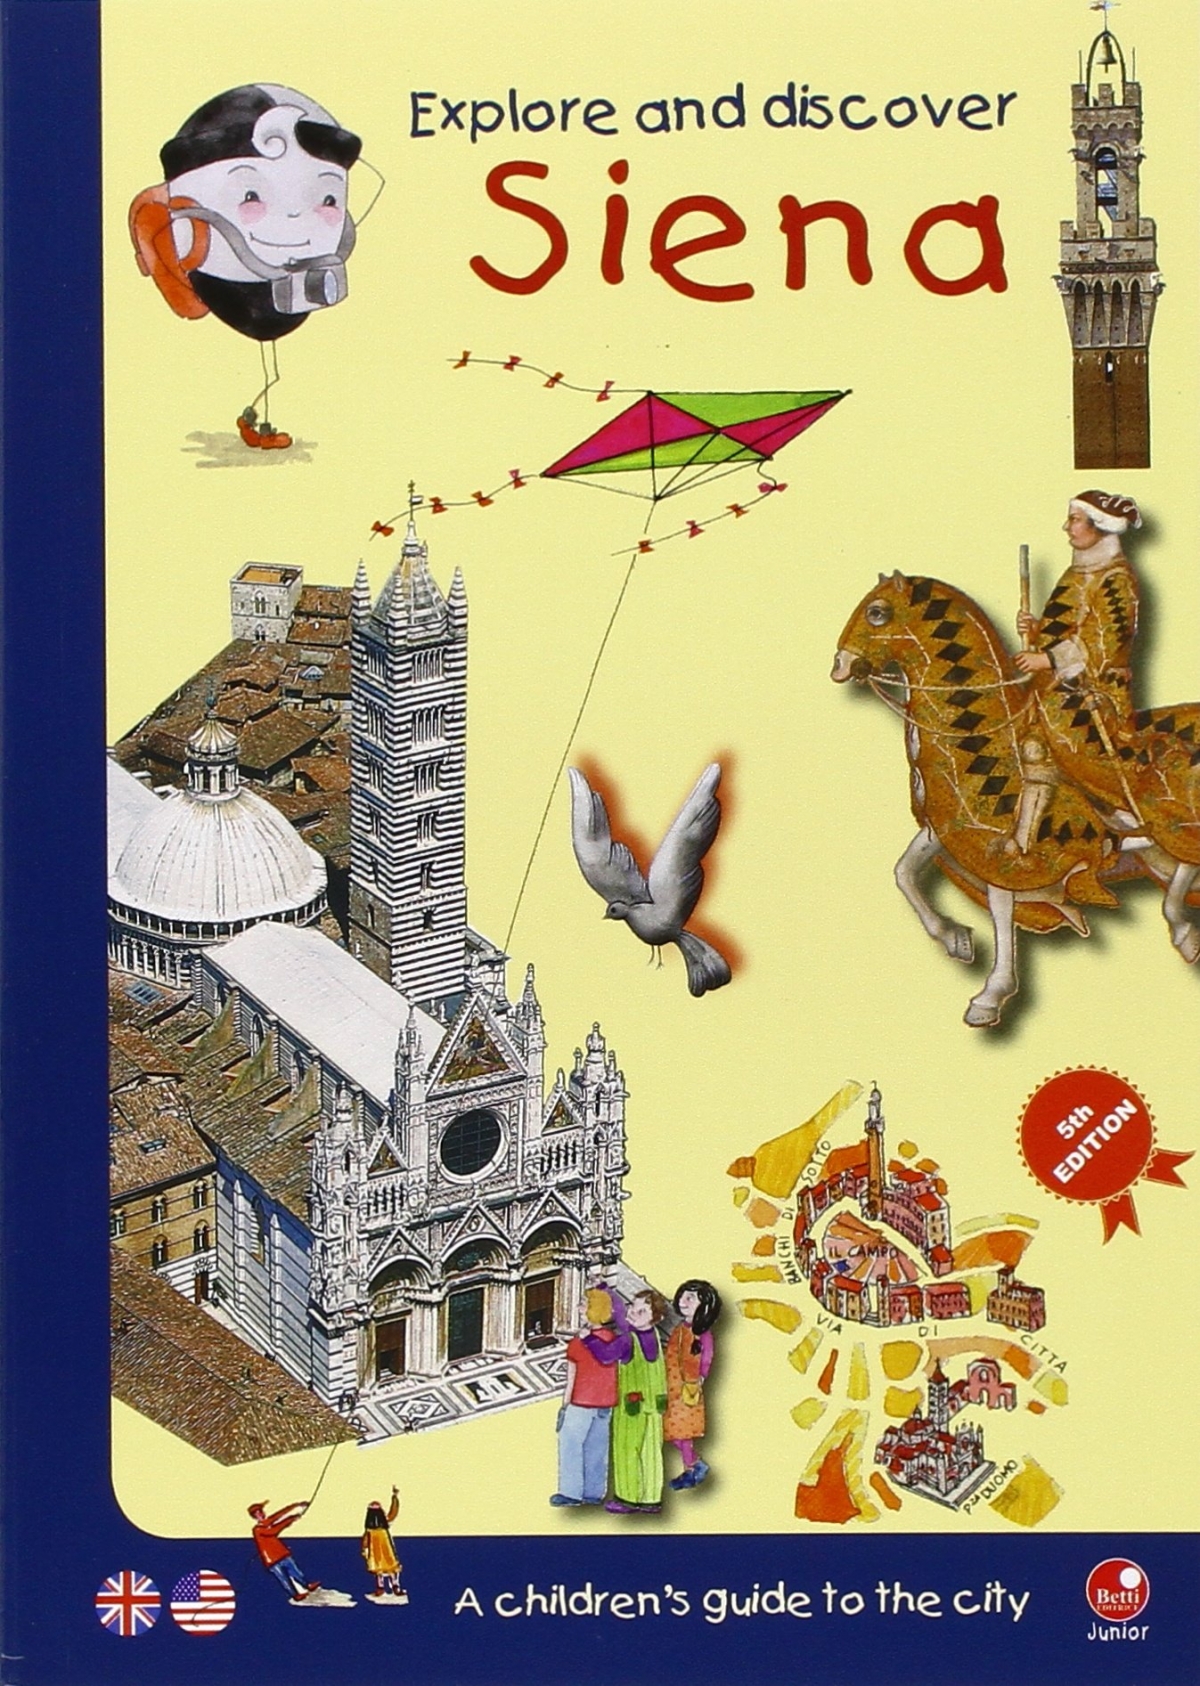 Explore and discover Siena